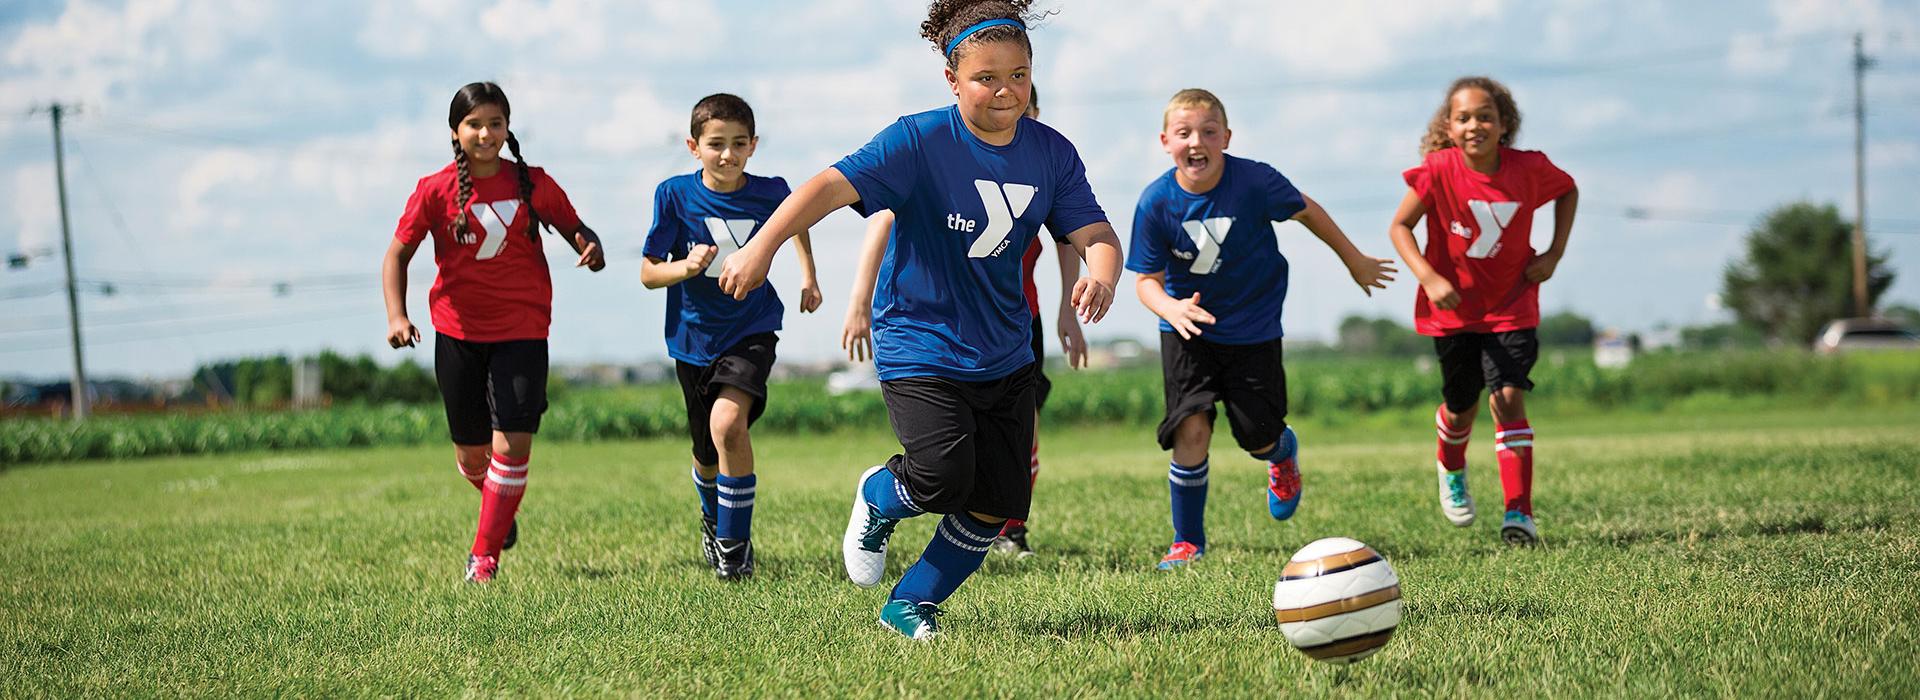 Diverse group of children in YMCA shirts playing soccer outdoors